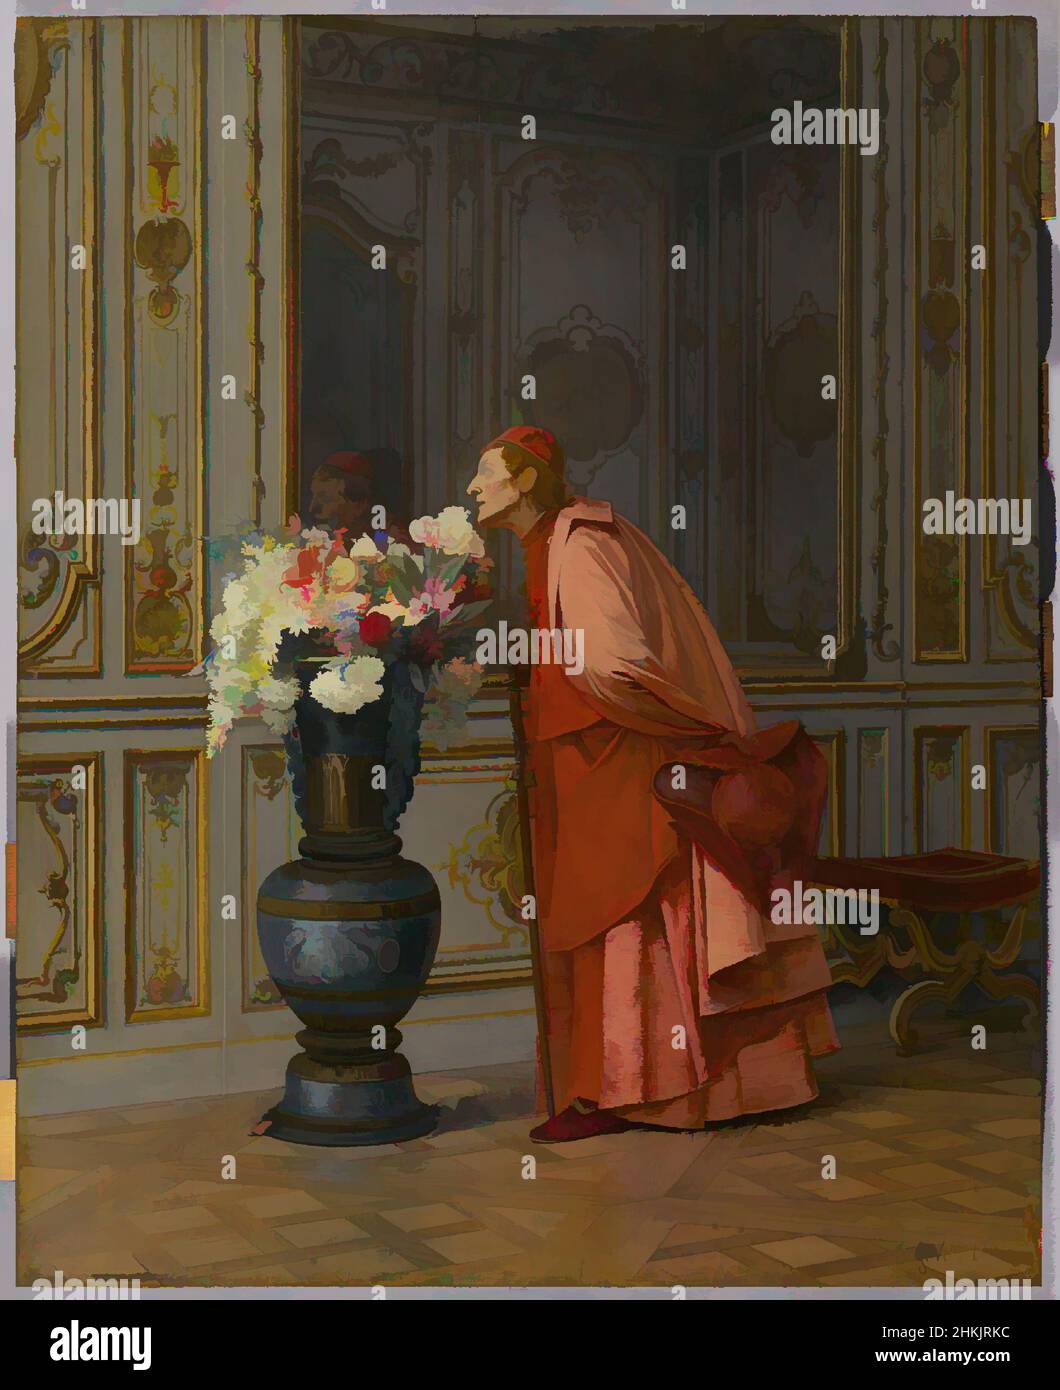 Art inspired by An Embarrassment of Choices, or A Difficult Choice, Un Embarras du Choix, Jehan-Georges Vibert, French, 1840-1902, Oil on panel, France, before 1873, 18 1/8 x 14 1/8 in., 46 x 35.9 cm, 1873, action, anti-Catholic, anti-clerical, aroma, bouquet, cardinal, choice, classic, Classic works modernized by Artotop with a splash of modernity. Shapes, color and value, eye-catching visual impact on art. Emotions through freedom of artworks in a contemporary way. A timeless message pursuing a wildly creative new direction. Artists turning to the digital medium and creating the Artotop NFT Stock Photo